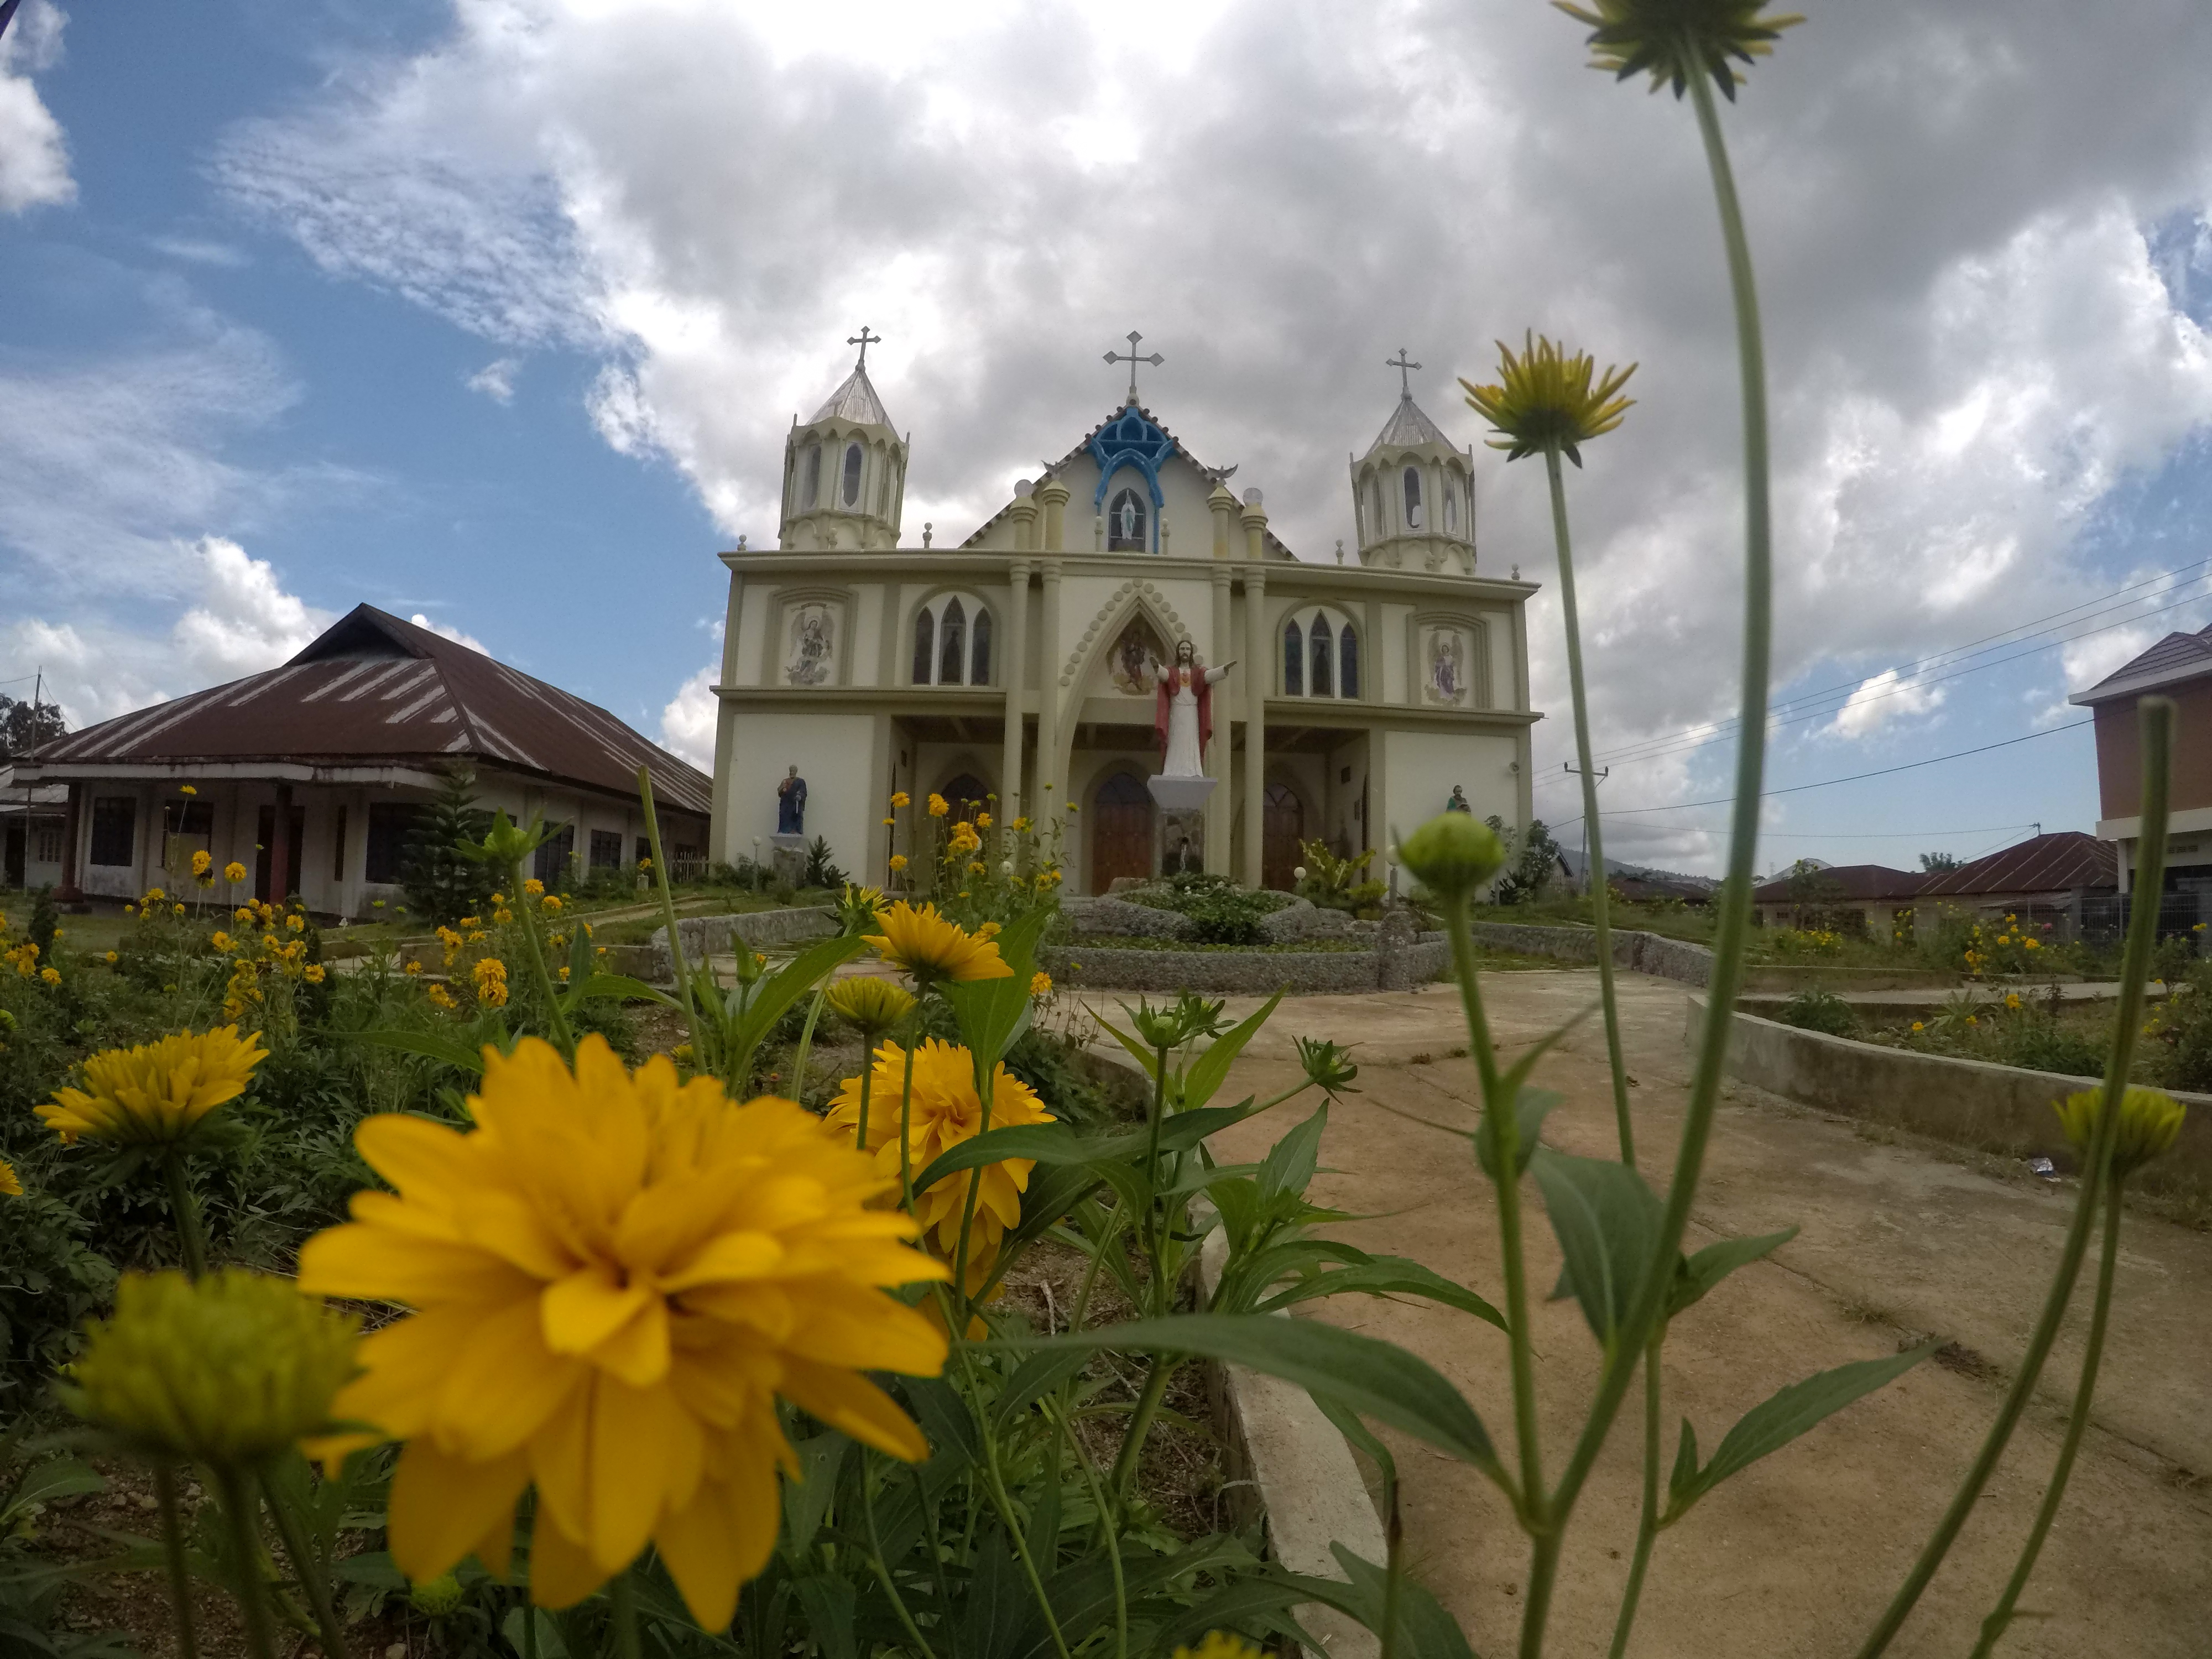 A huge church with bright yellow flowers in front of it and a large statue of Jesus.